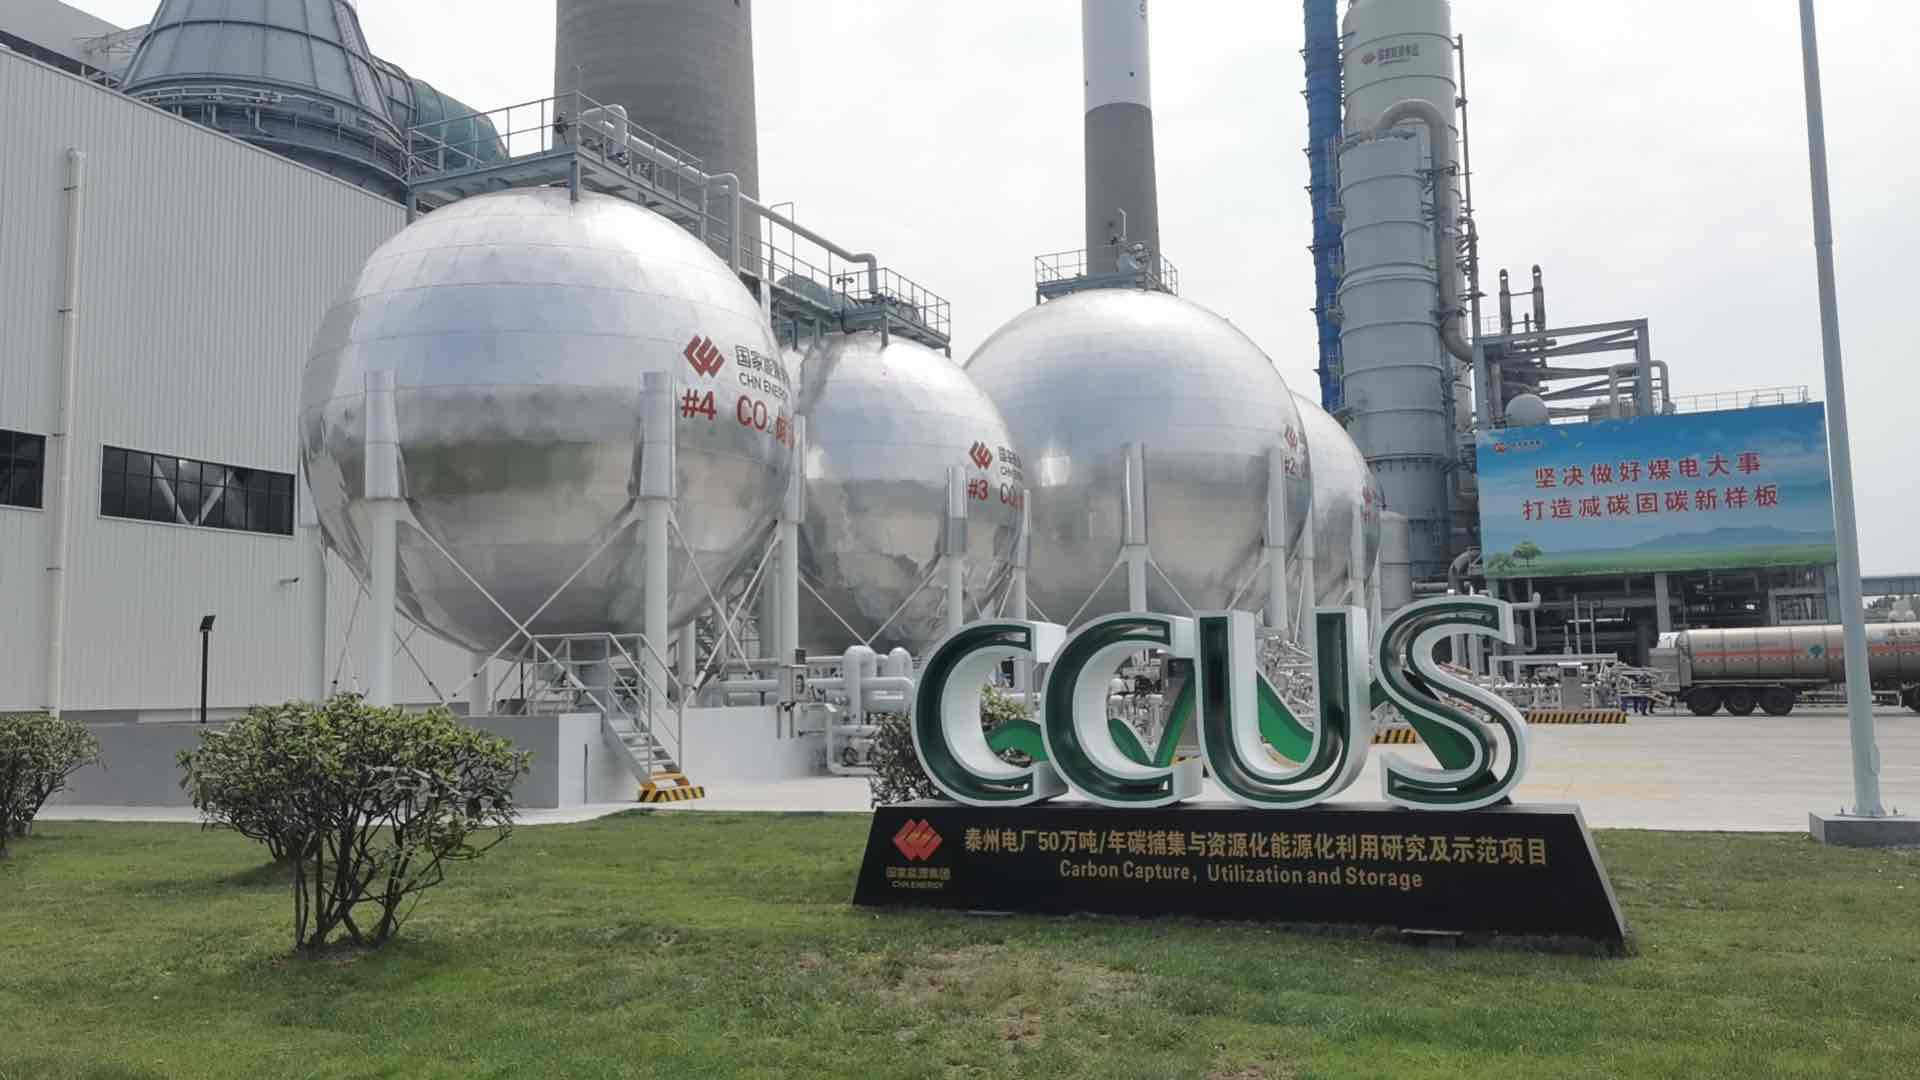 Promote Green Development and Build a Beautiful China  - CCUS Project supported by Sinoseal successfully put into production